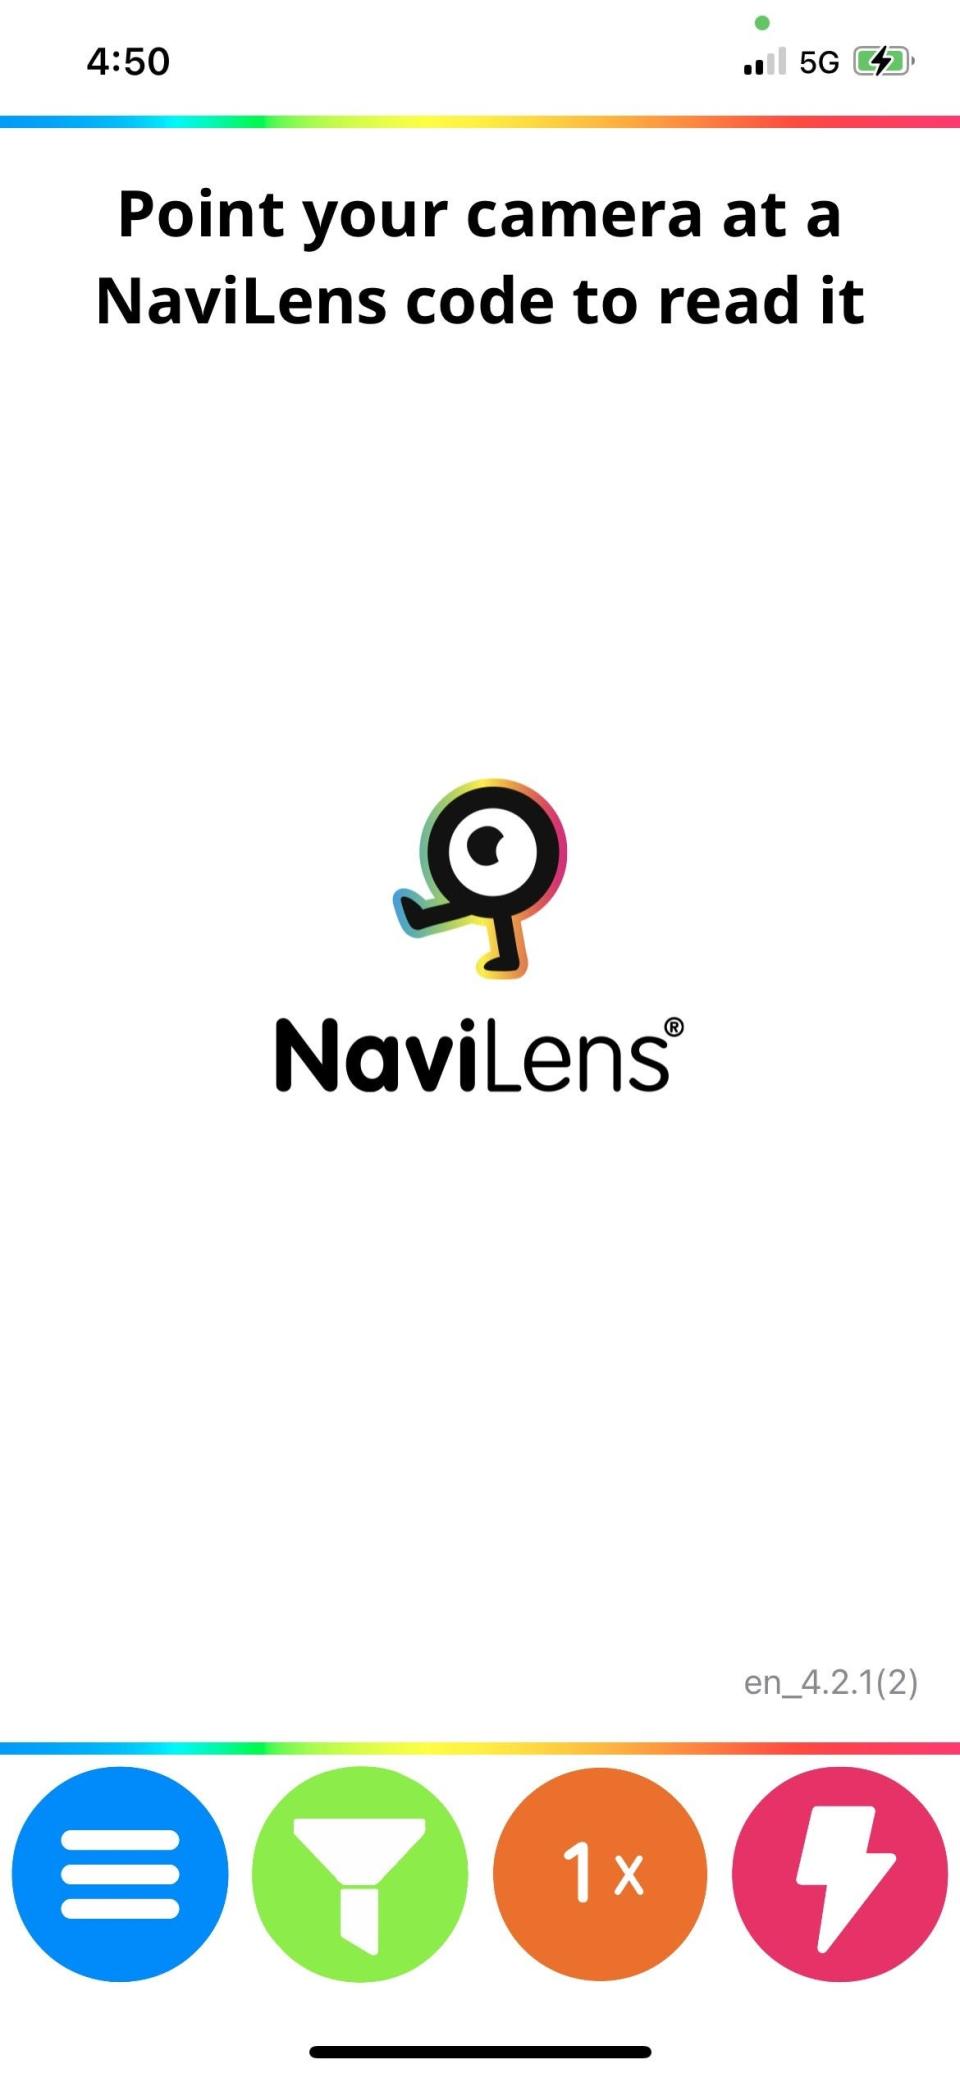 NJ Transit bus riders who are hearing or visually impaired can upload the NaviLens app to get real-time bus info in large print at some locations in a pilot program.